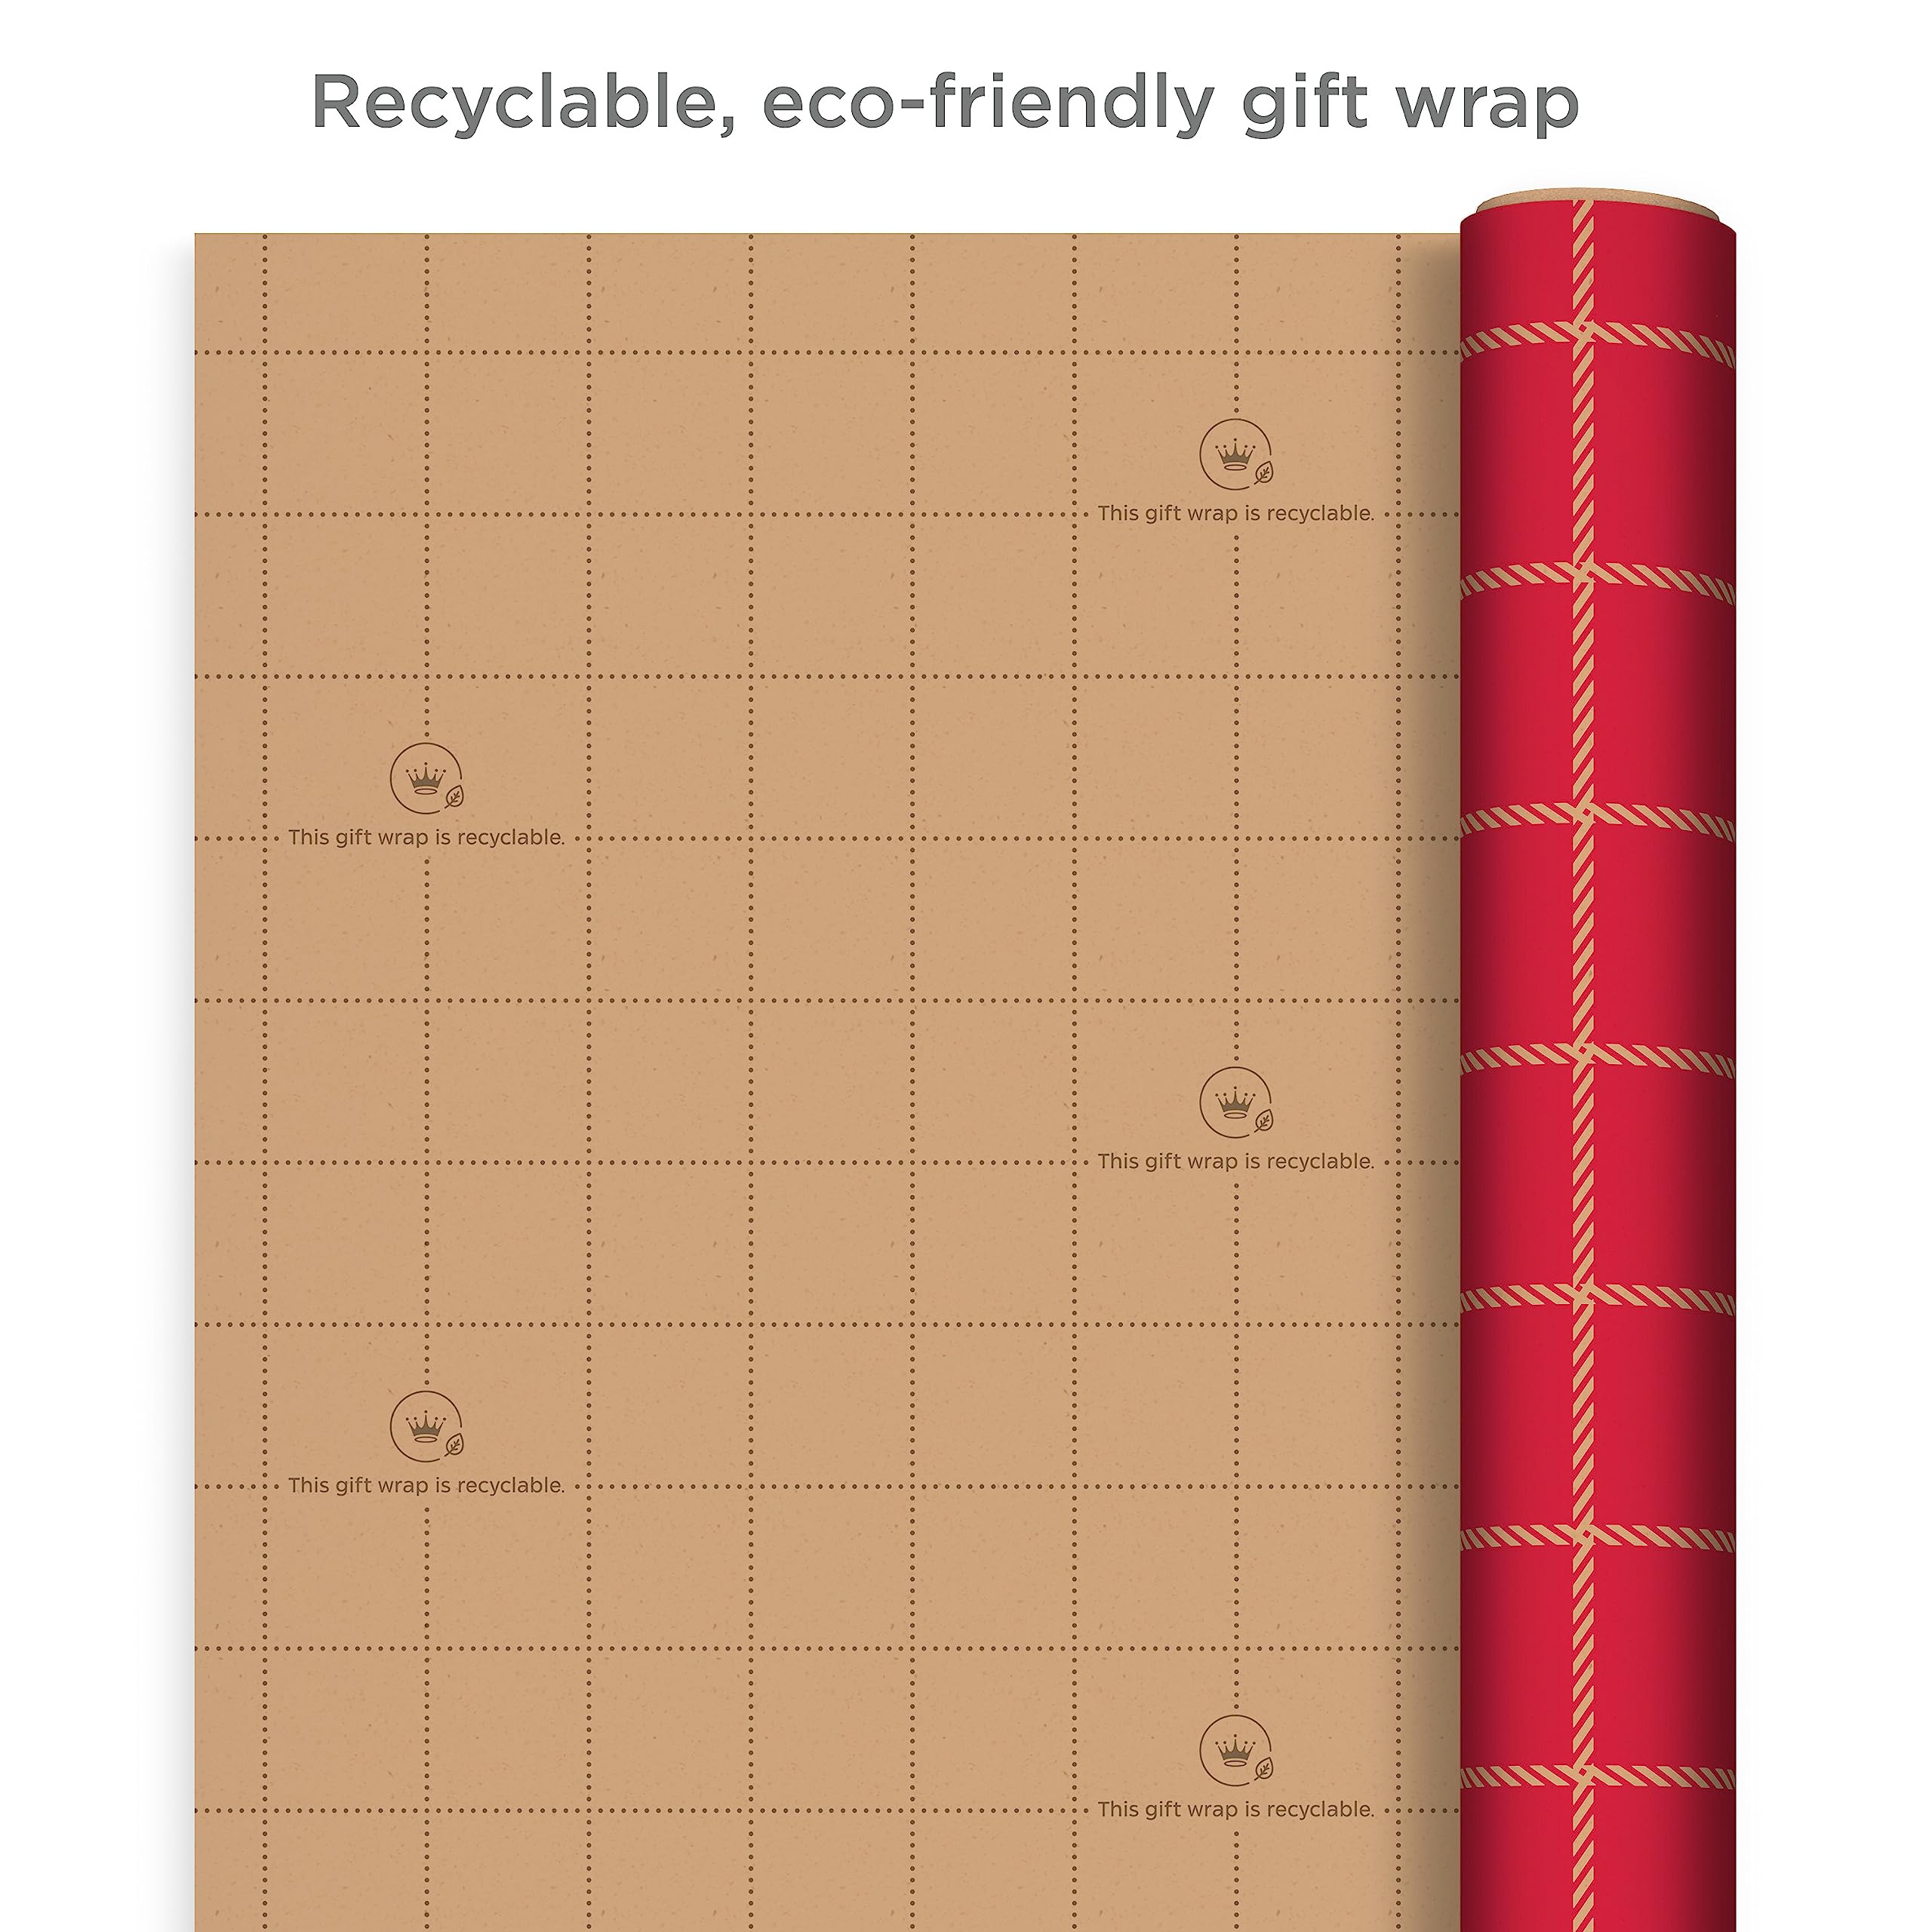 Hallmark All Occasion Reversible Wrapping Paper - Gold & Kraft Stripes, Triangles, Chevron, Polka Dots